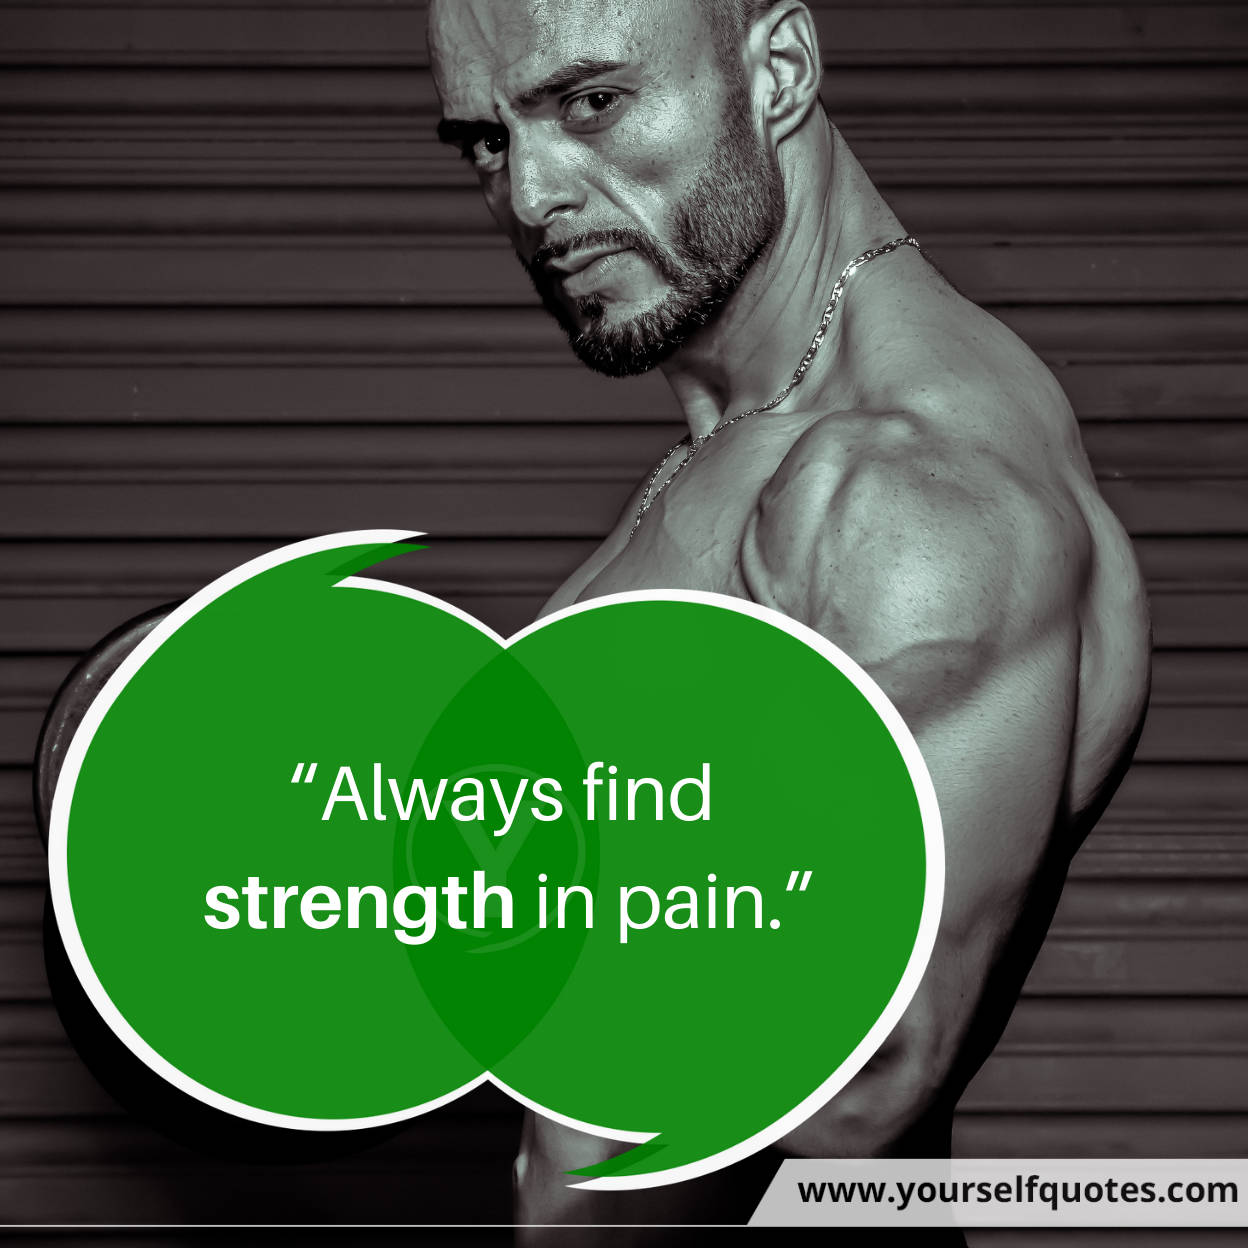 Quotes on Strength